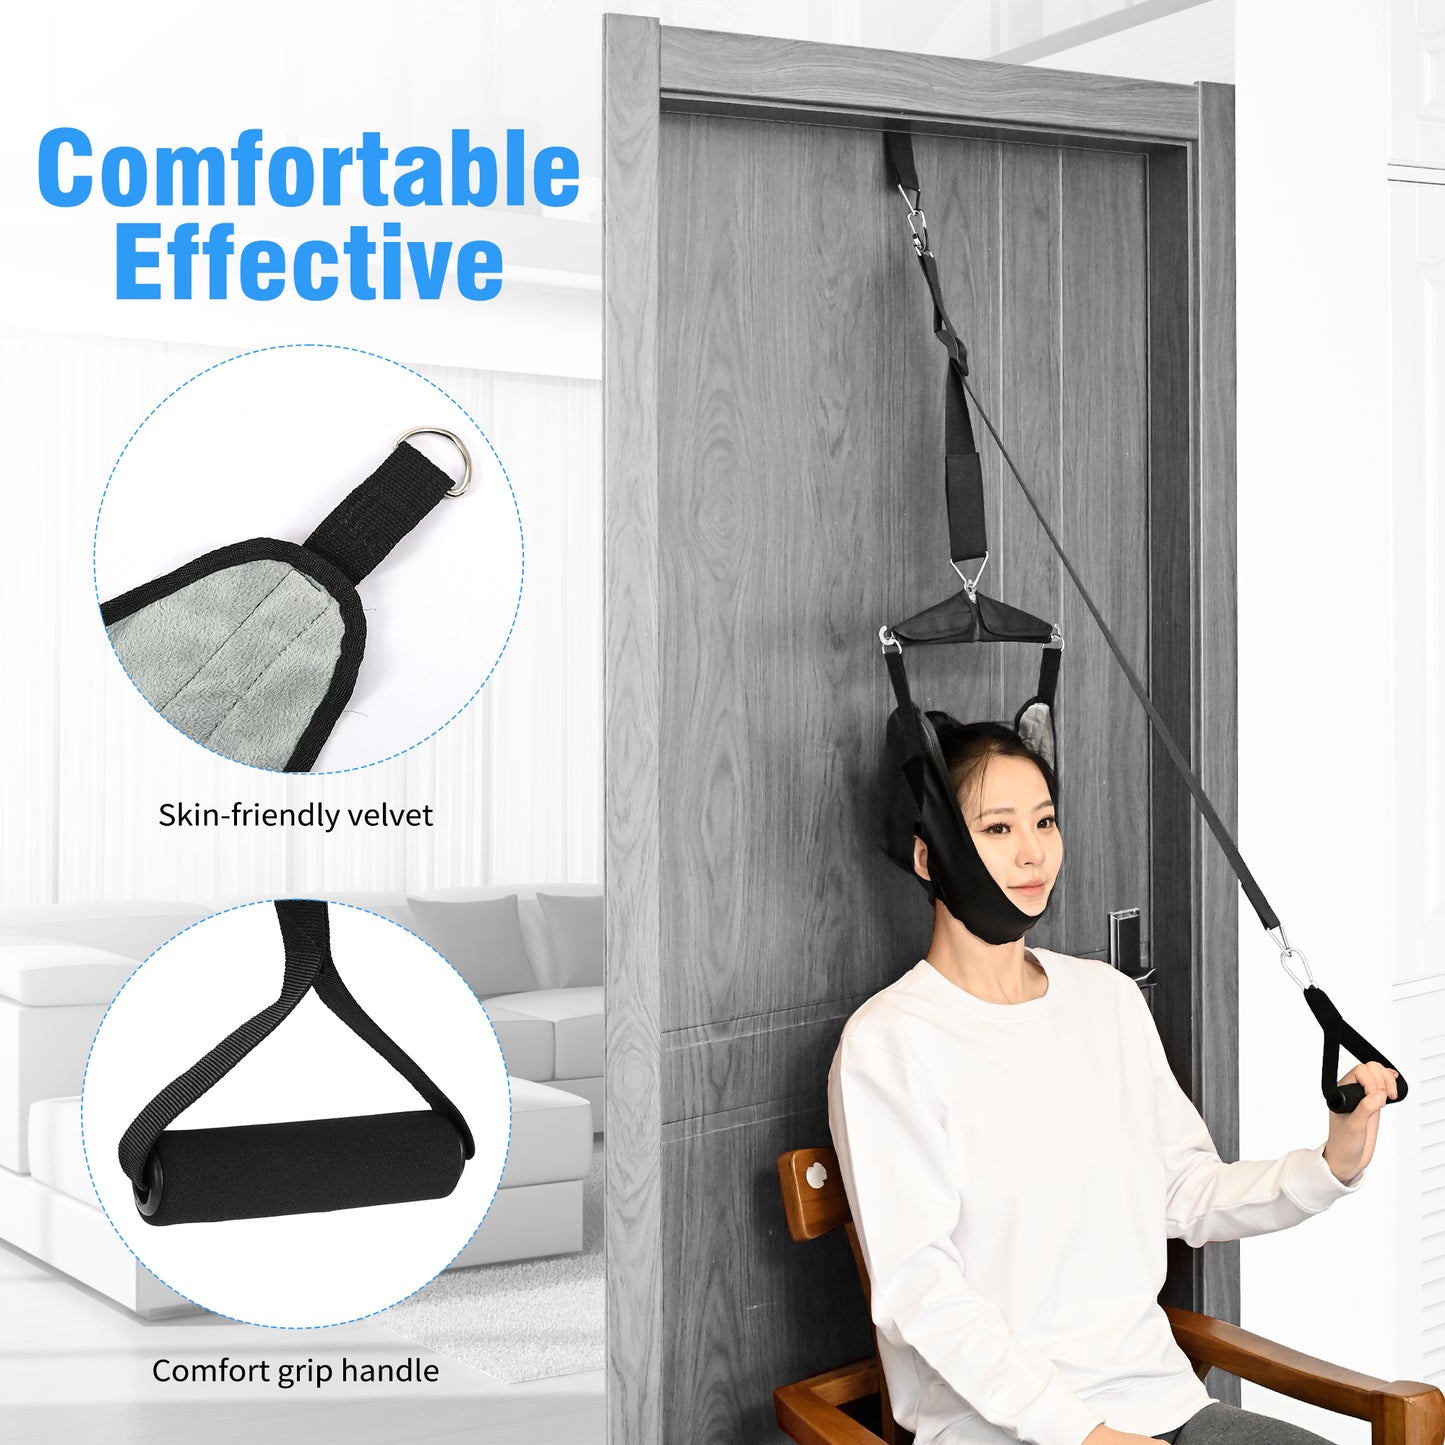 KEKOY Neck Stretcher Cervical Neck Traction Device for Home Use